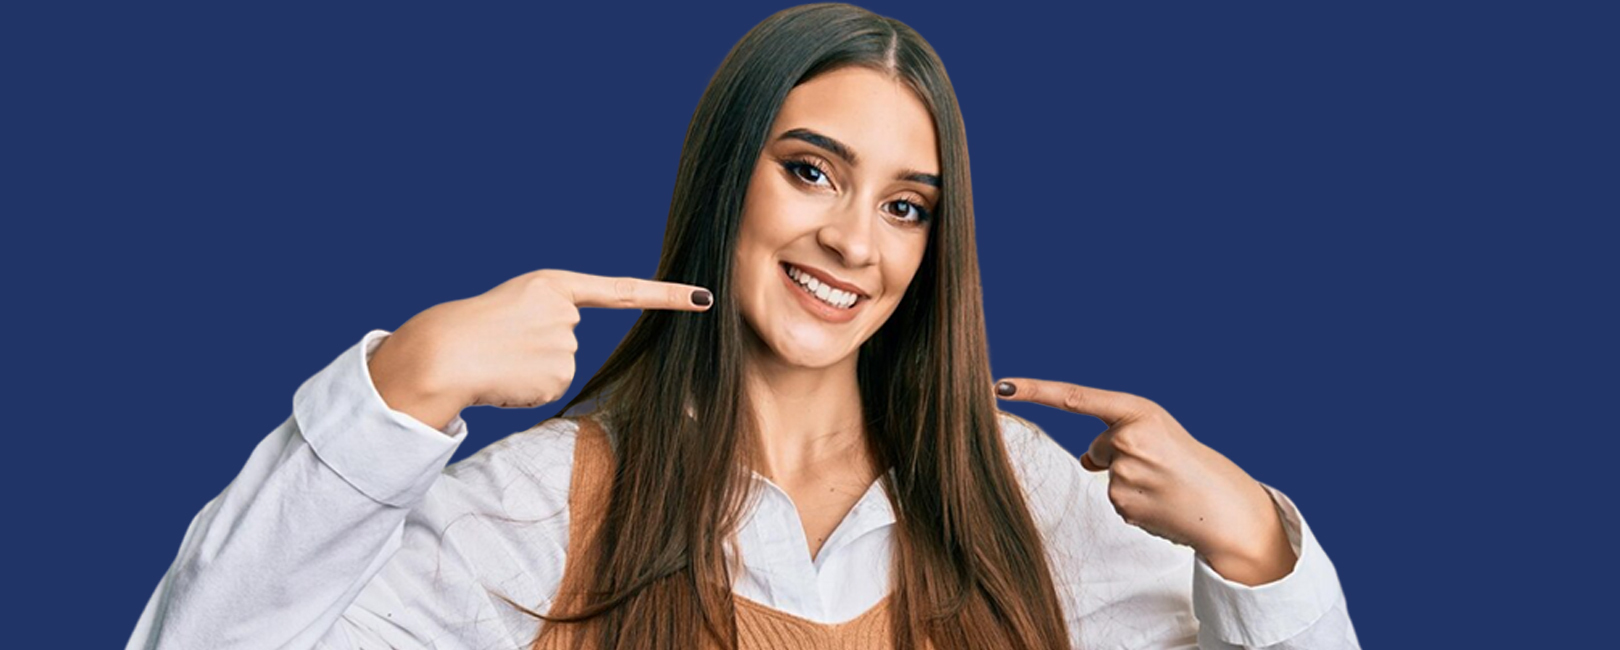 A smiling woman pointing to her clear aligners.